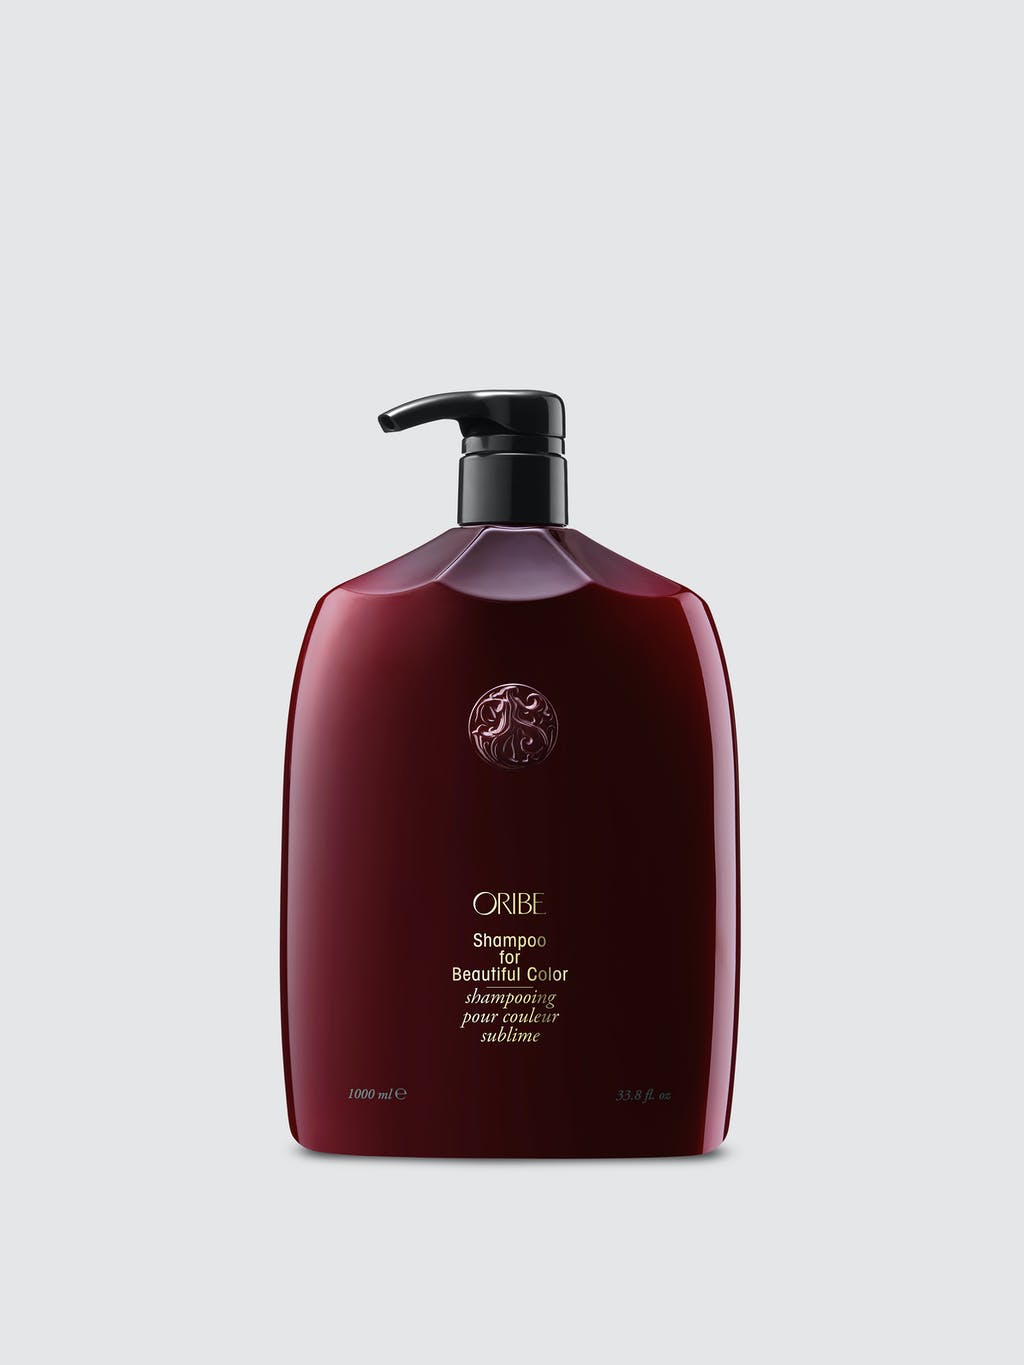 Shampoo for Beautiful Color - Retail Liter